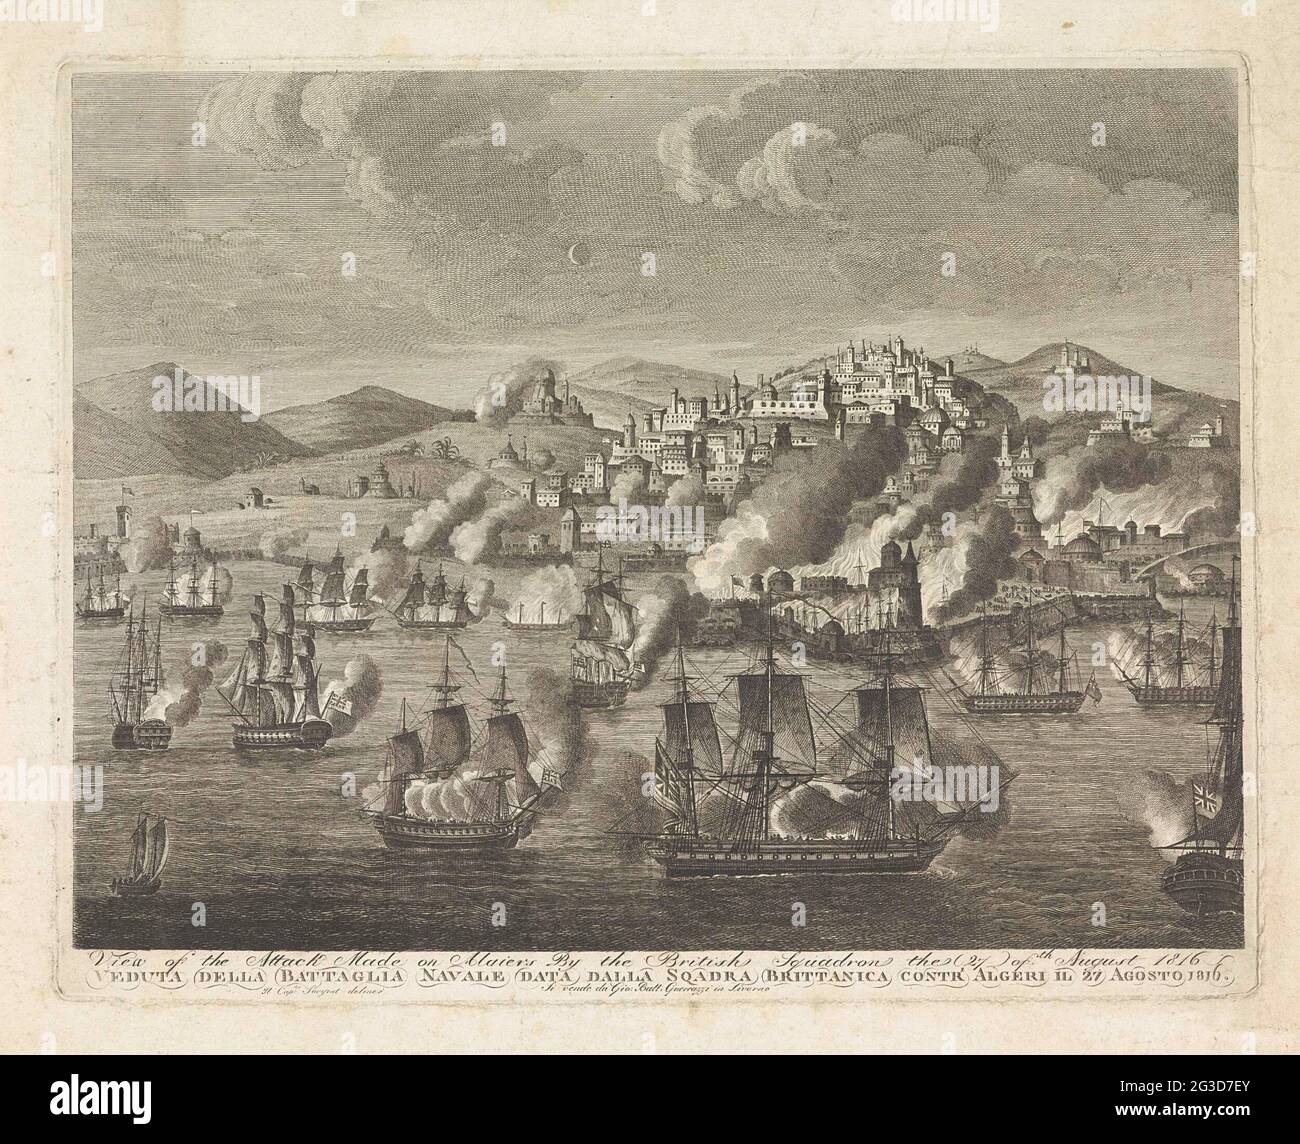 Bombing of Algiers, 1816; View of the attack Made on Algiers by the British Squadron The 27th of August 1816 / veduta della Battaglia Navale Data Dalla Sqadra Brittanica Conttr 'Algeri IL 27 Agosto 1816. The Bombing of Algiers at night from 26-27 August 1816 by the combined English -Dutch fleet, under command of Lord Exmouth and Jonkheer van Capellen. The allied fleet in the foreground, behind it flames and smoke from the burning ships and buildings on the coast. Behind this the city on the hills on the coast. Stock Photo